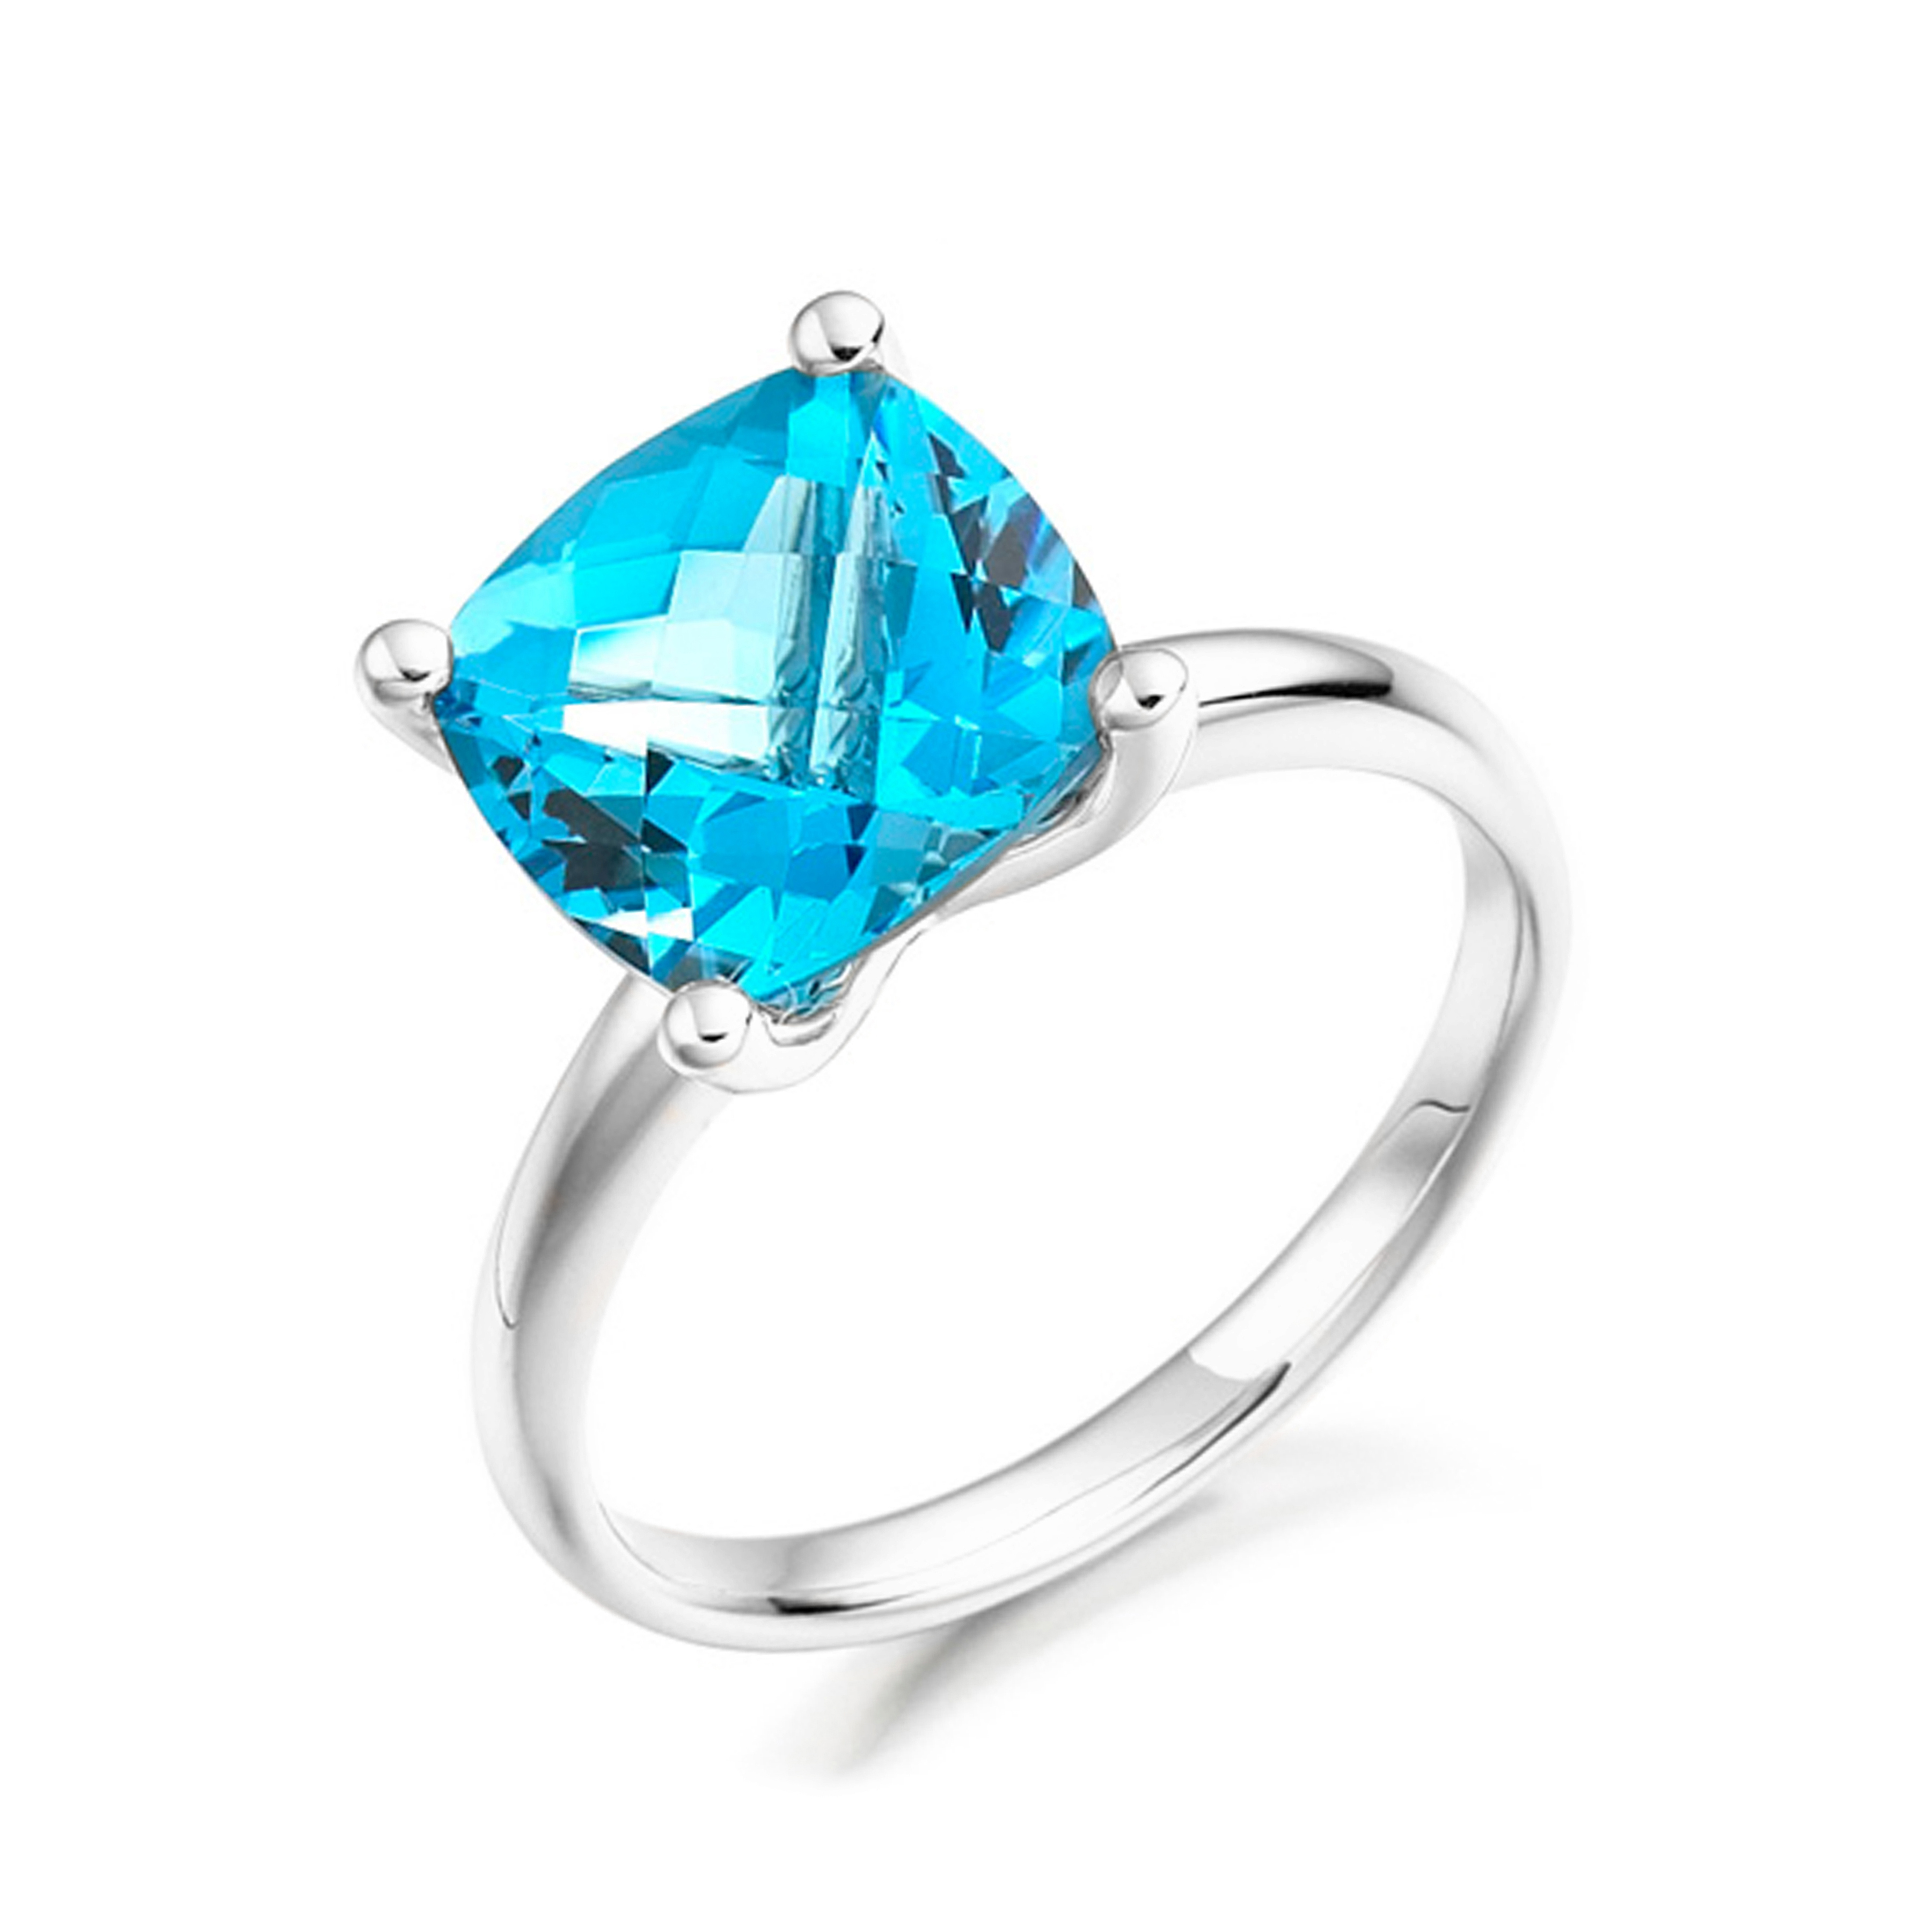 6mm Cushion Sqare Blue Topaz Solitaire Diamond And Gemstone Engagement Ring